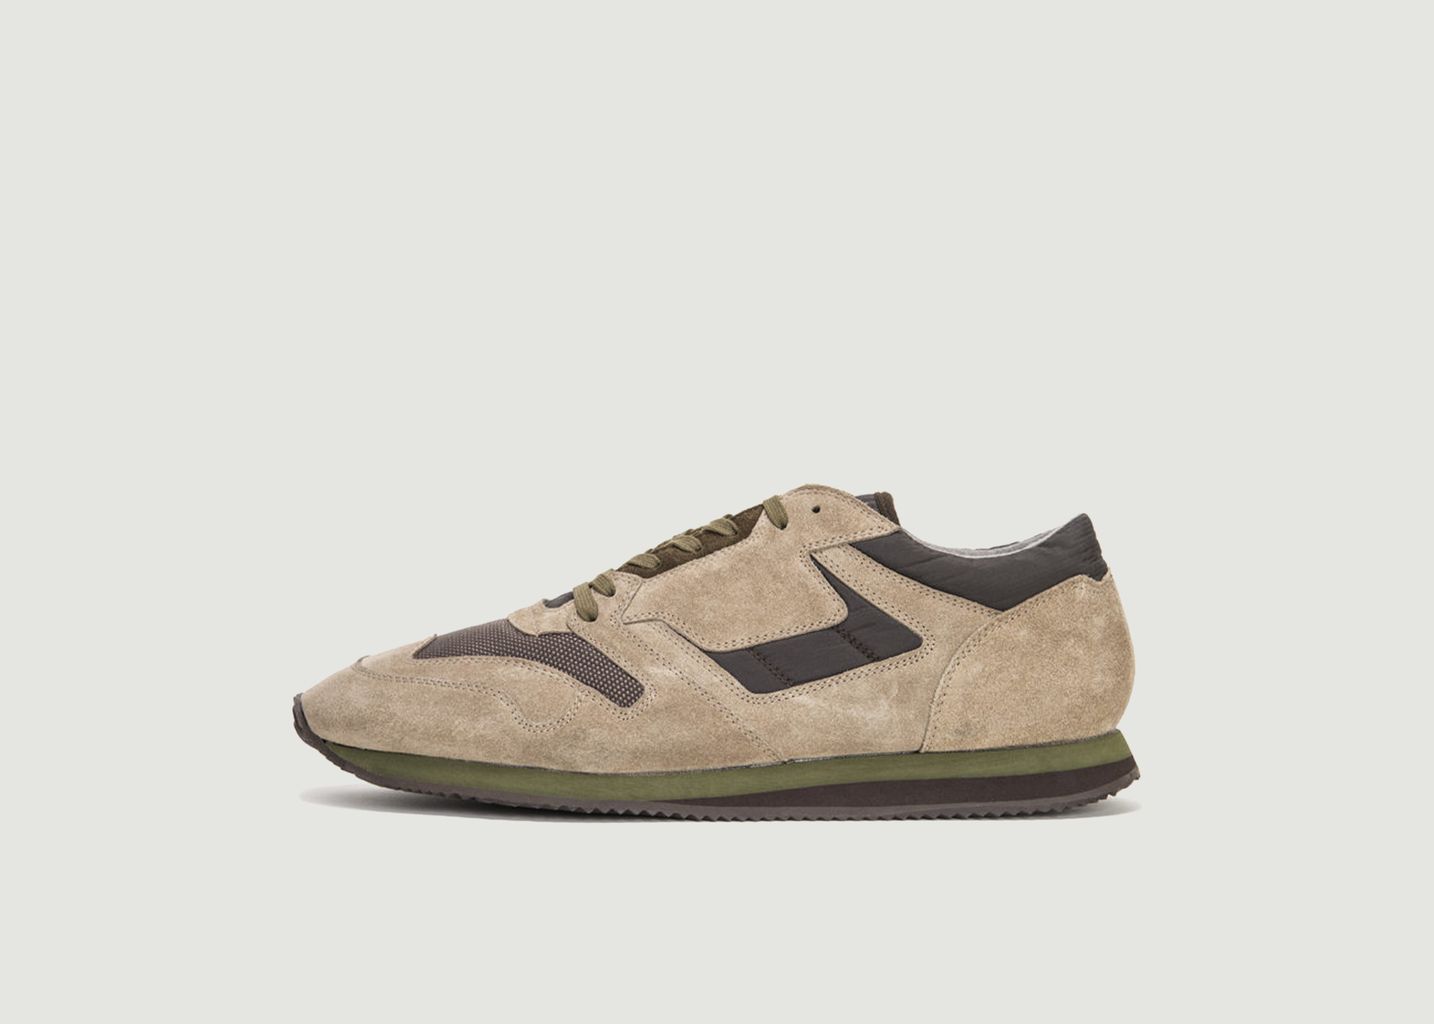 British Military Sneakers - Reproduction of found